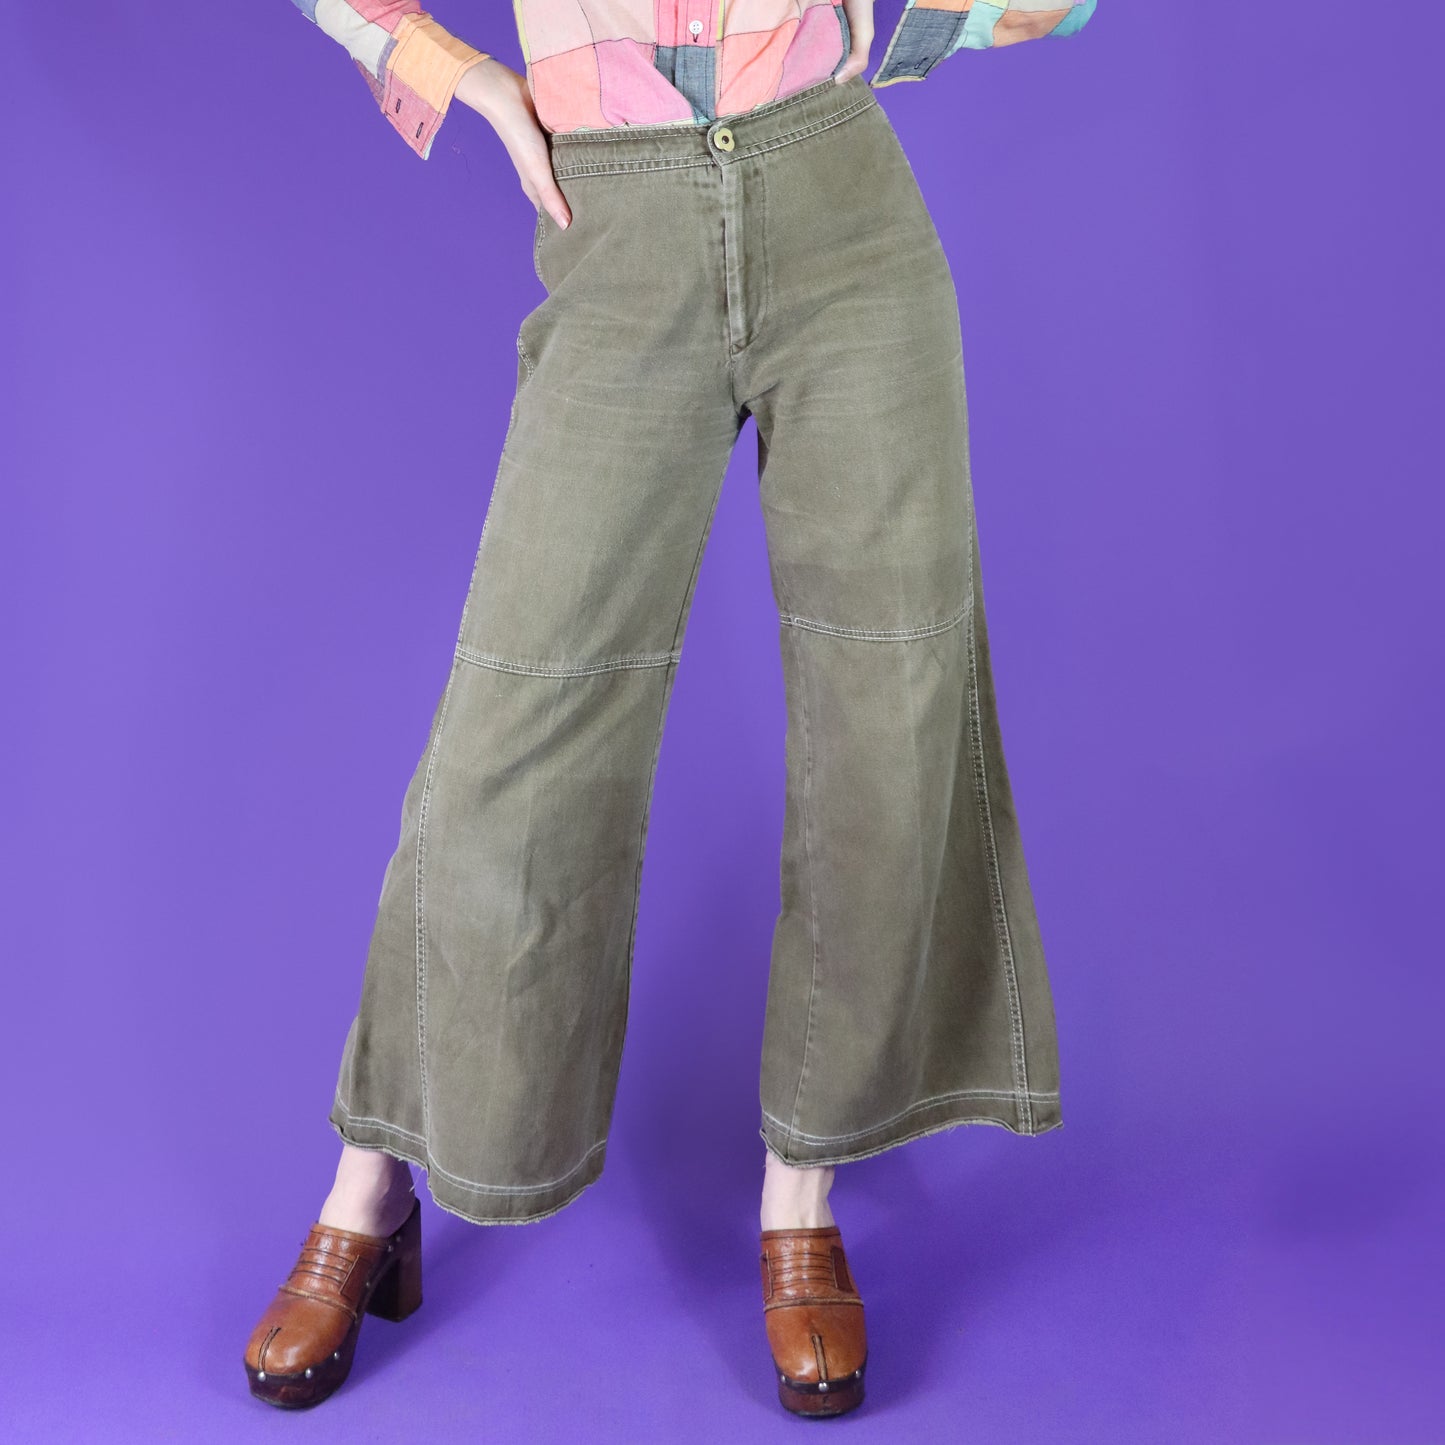 Vintage 1970s Olive Green Washed Out Flares by Roncelli